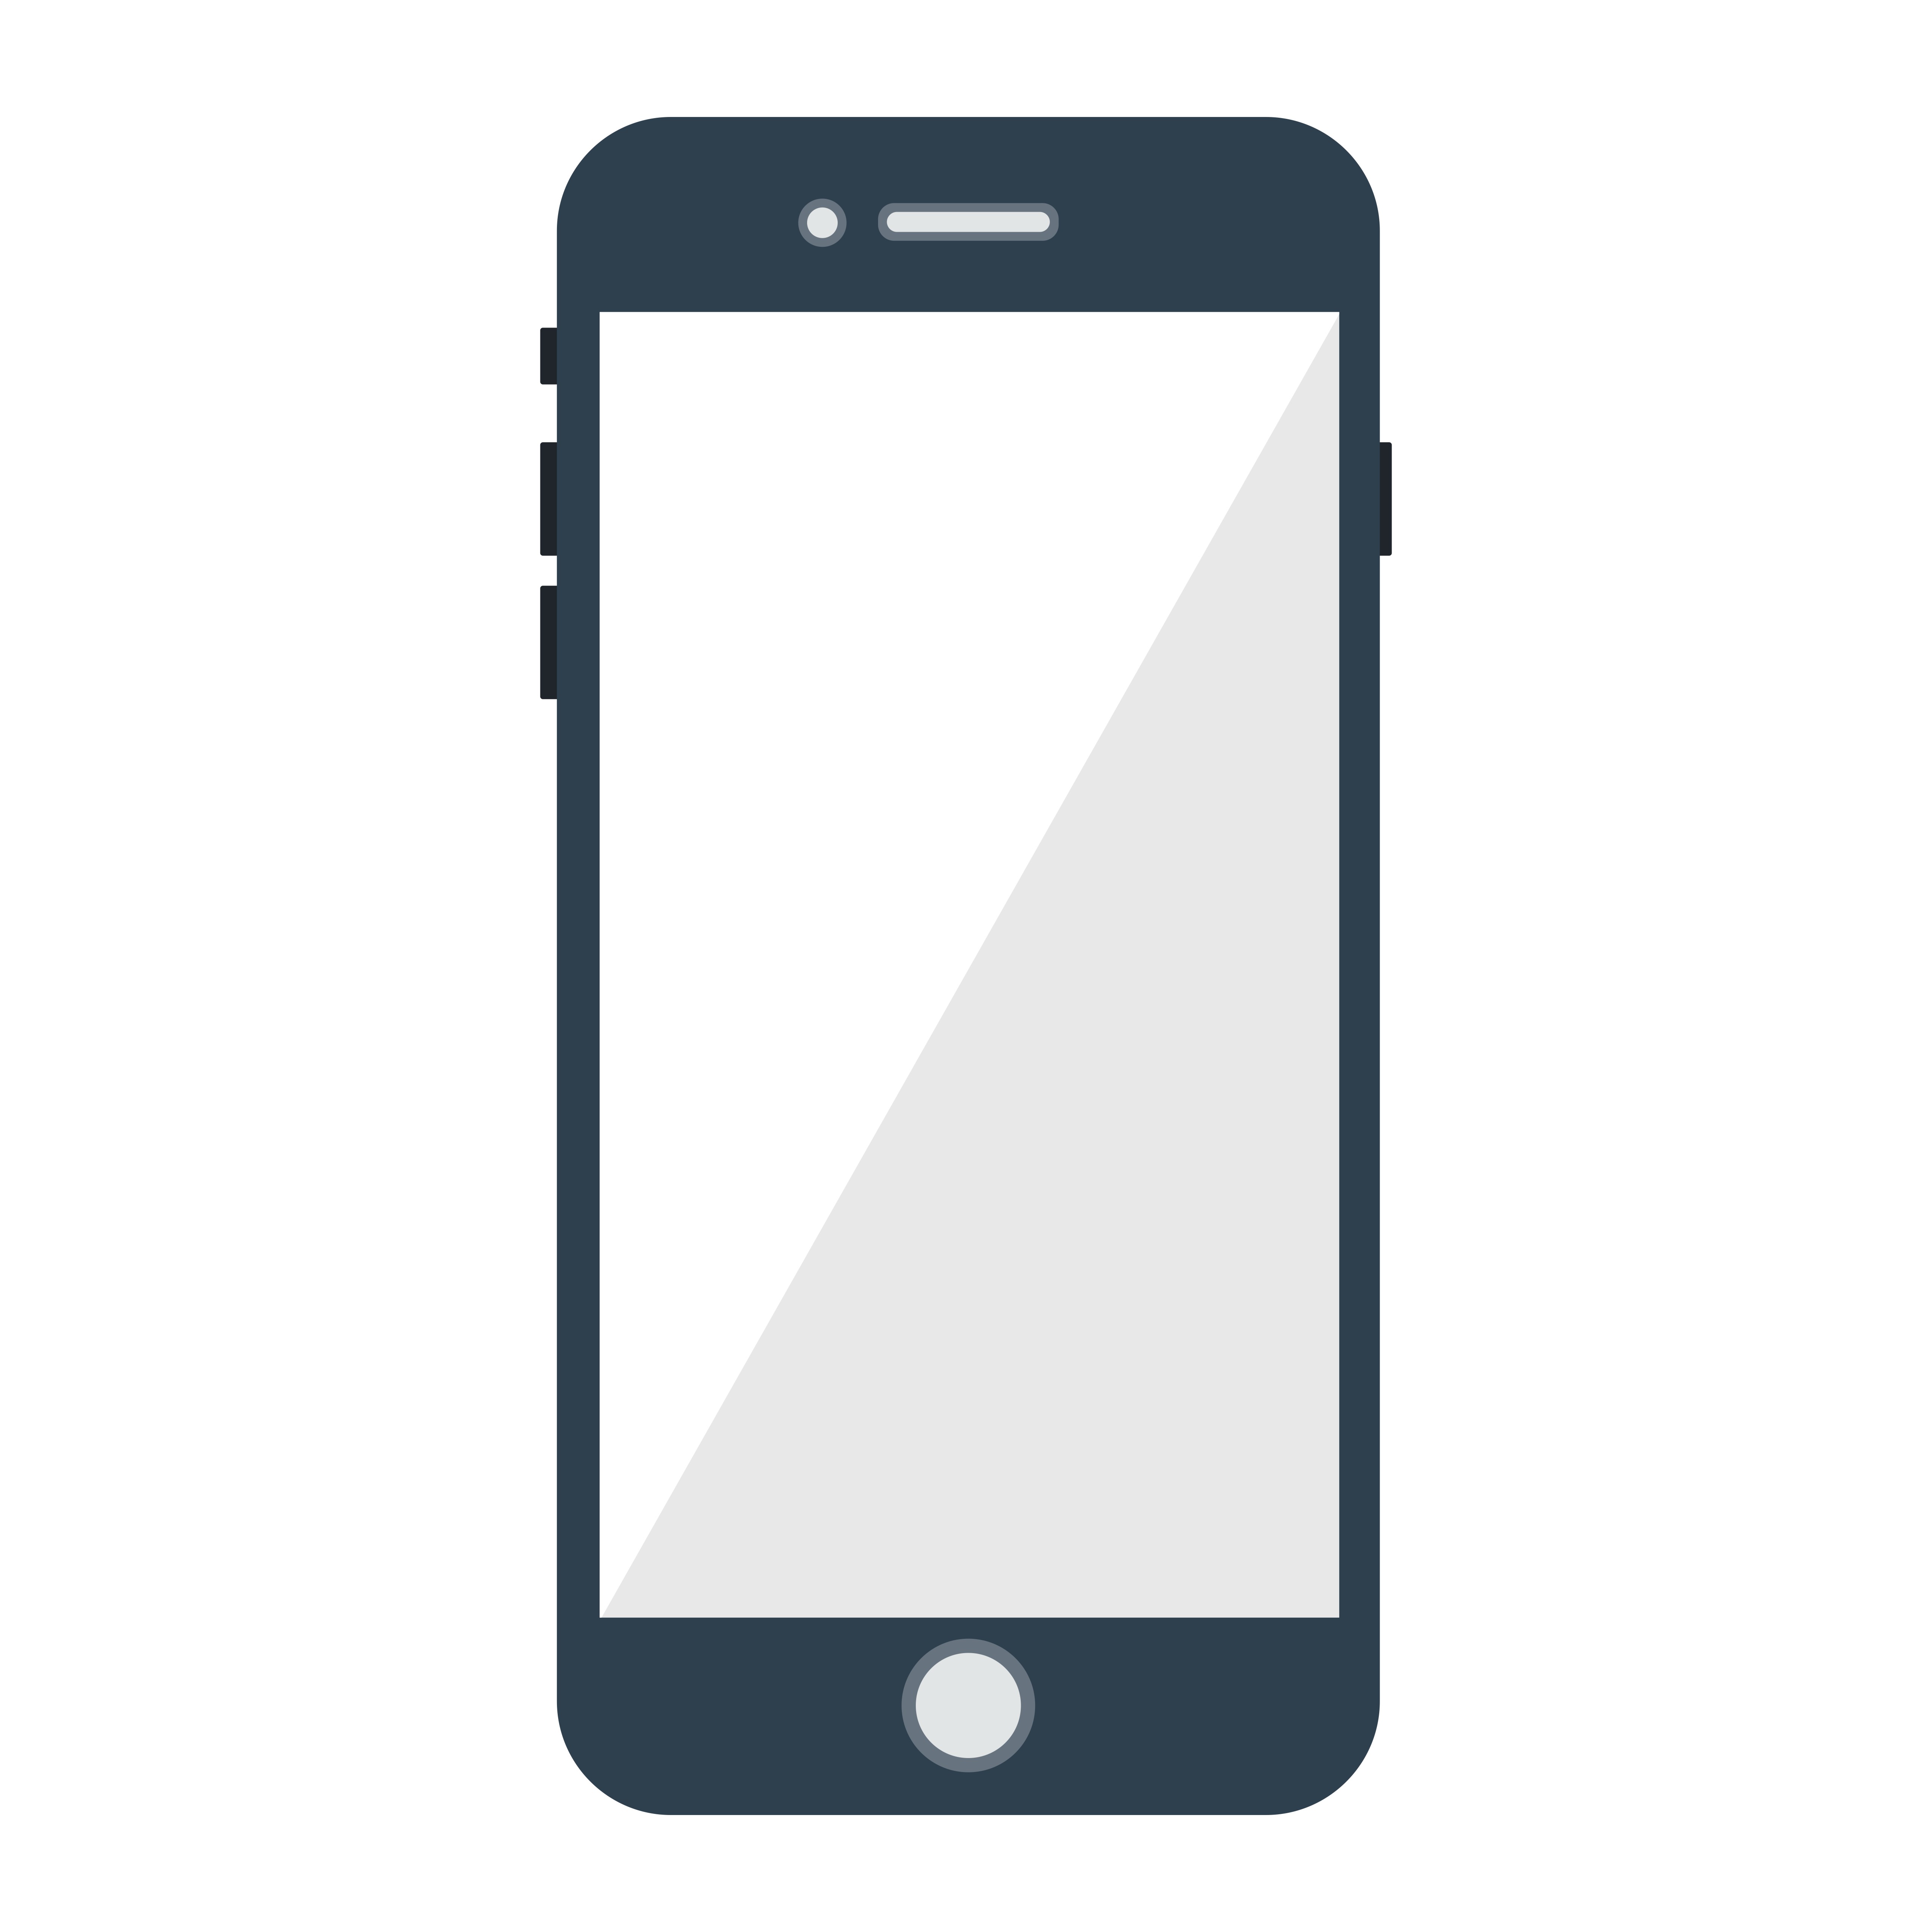 Download Cell Phone Vector Icon - Download Free Vectors, Clipart Graphics & Vector Art